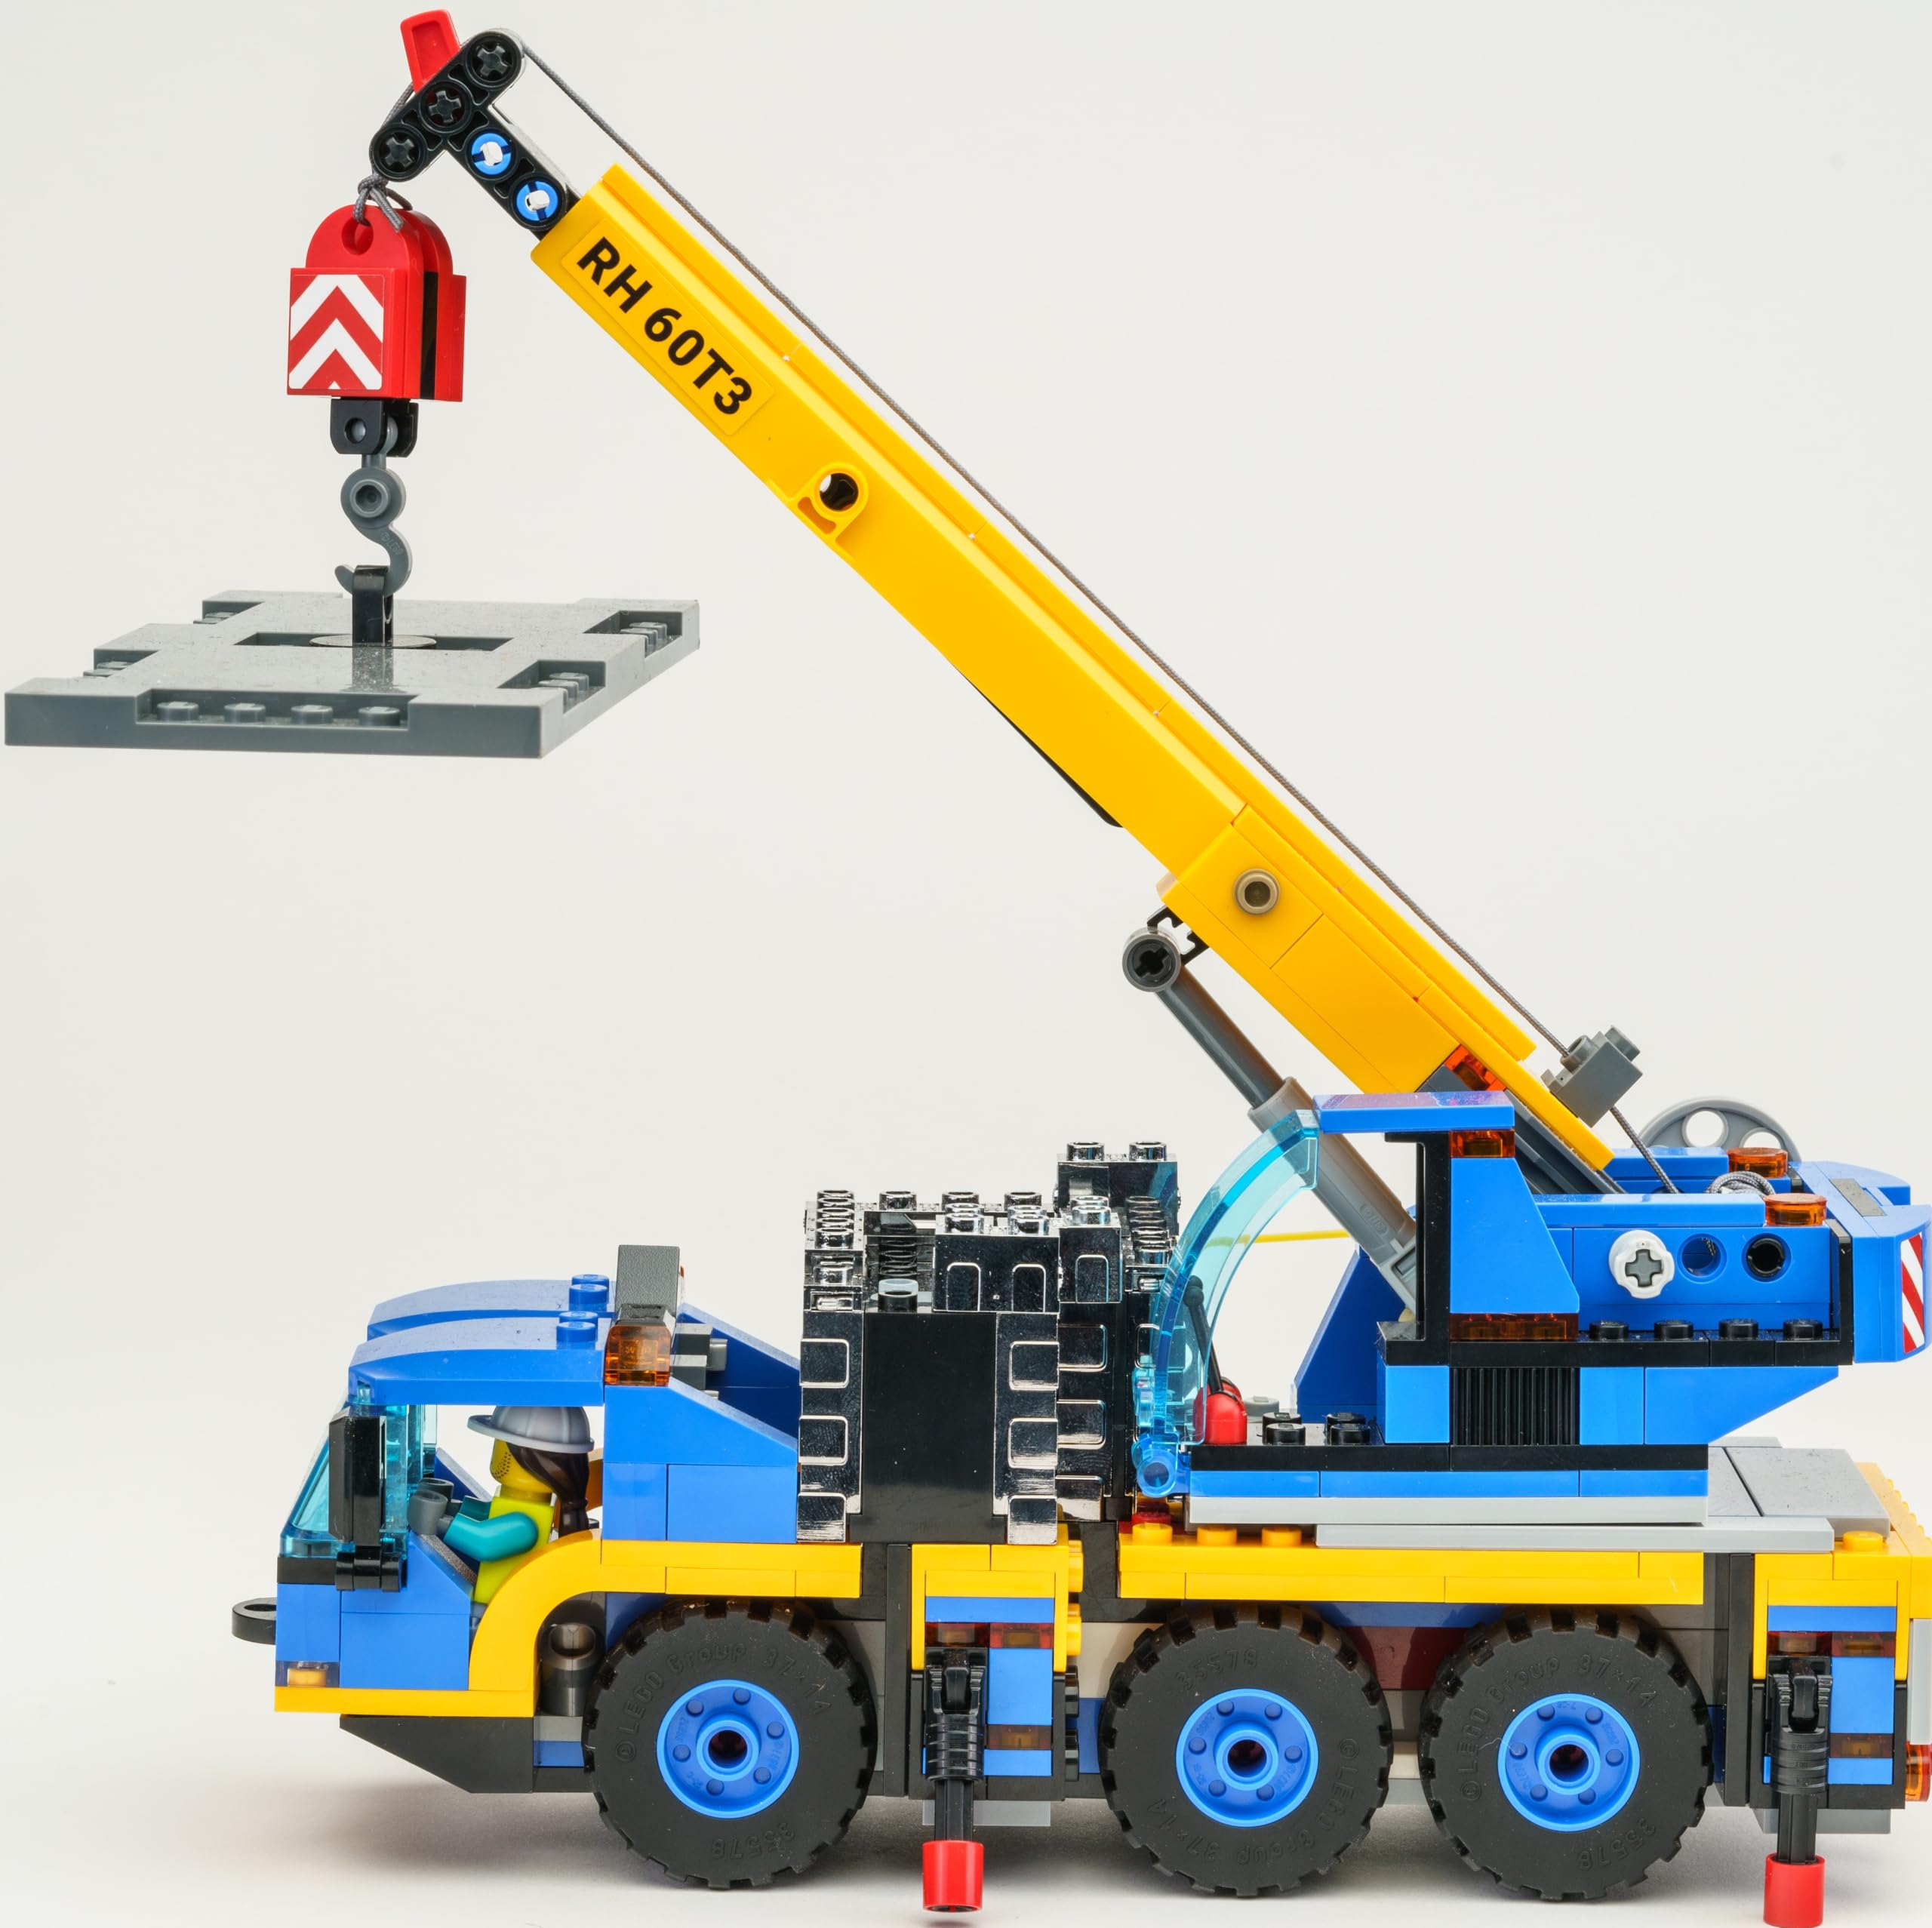 Dakott Conductive Chrome-Plated Building Bricks Kit for LegoCity Mobile Crane Truck. Compatible with 60324 Model- not Including The Set. Bring Life to Your LegoCity Mobile Crane Truck.